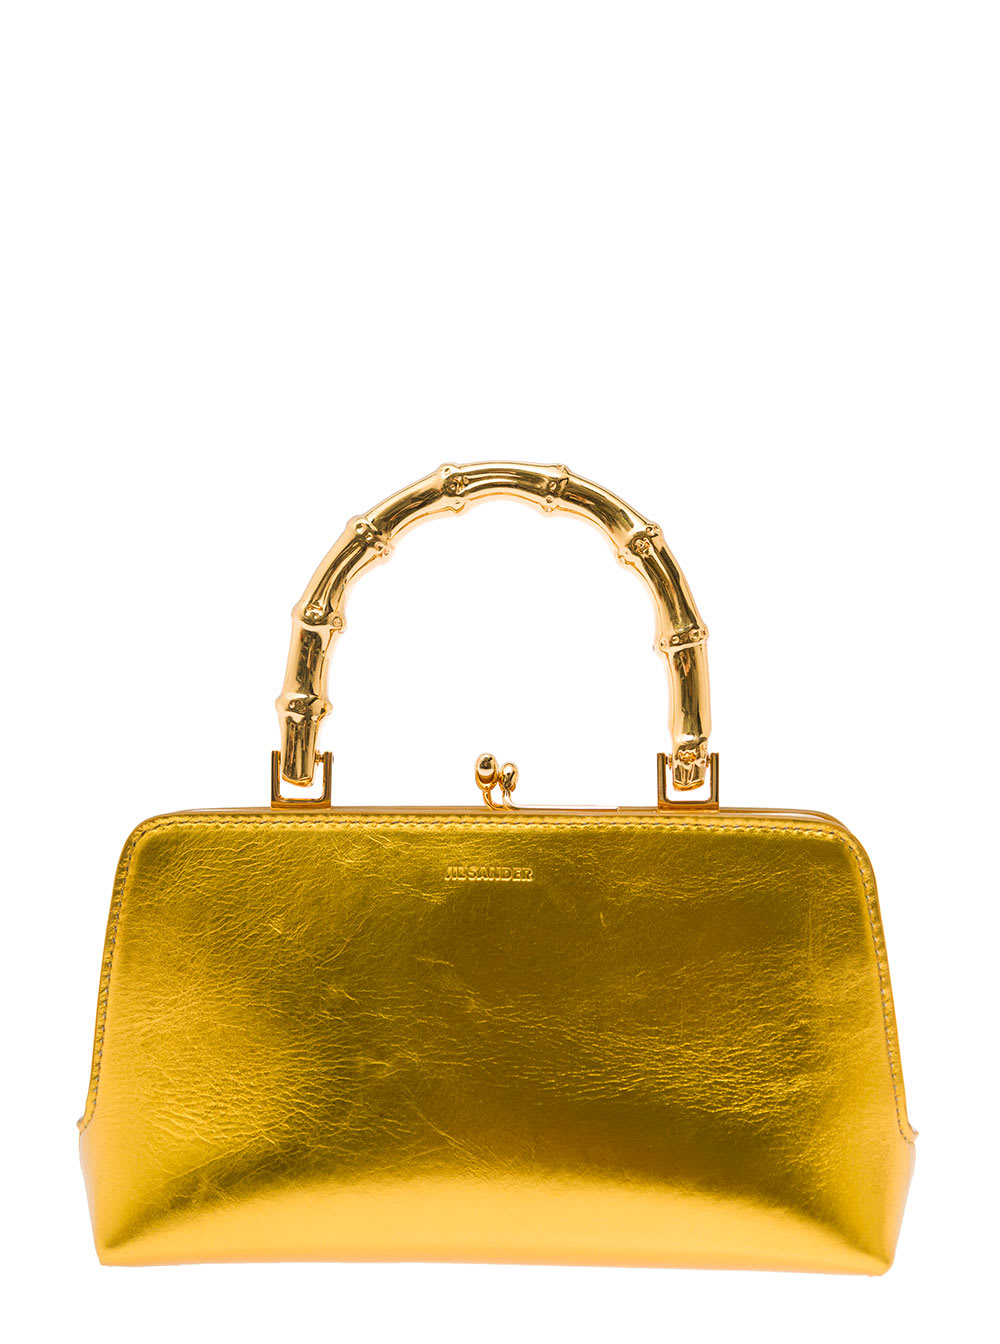 JIL SANDER GOLD GOJI MINI BAMBOO HAND BAG WITH GOLD-TONE HANDLE IN LEATHER WOMAN